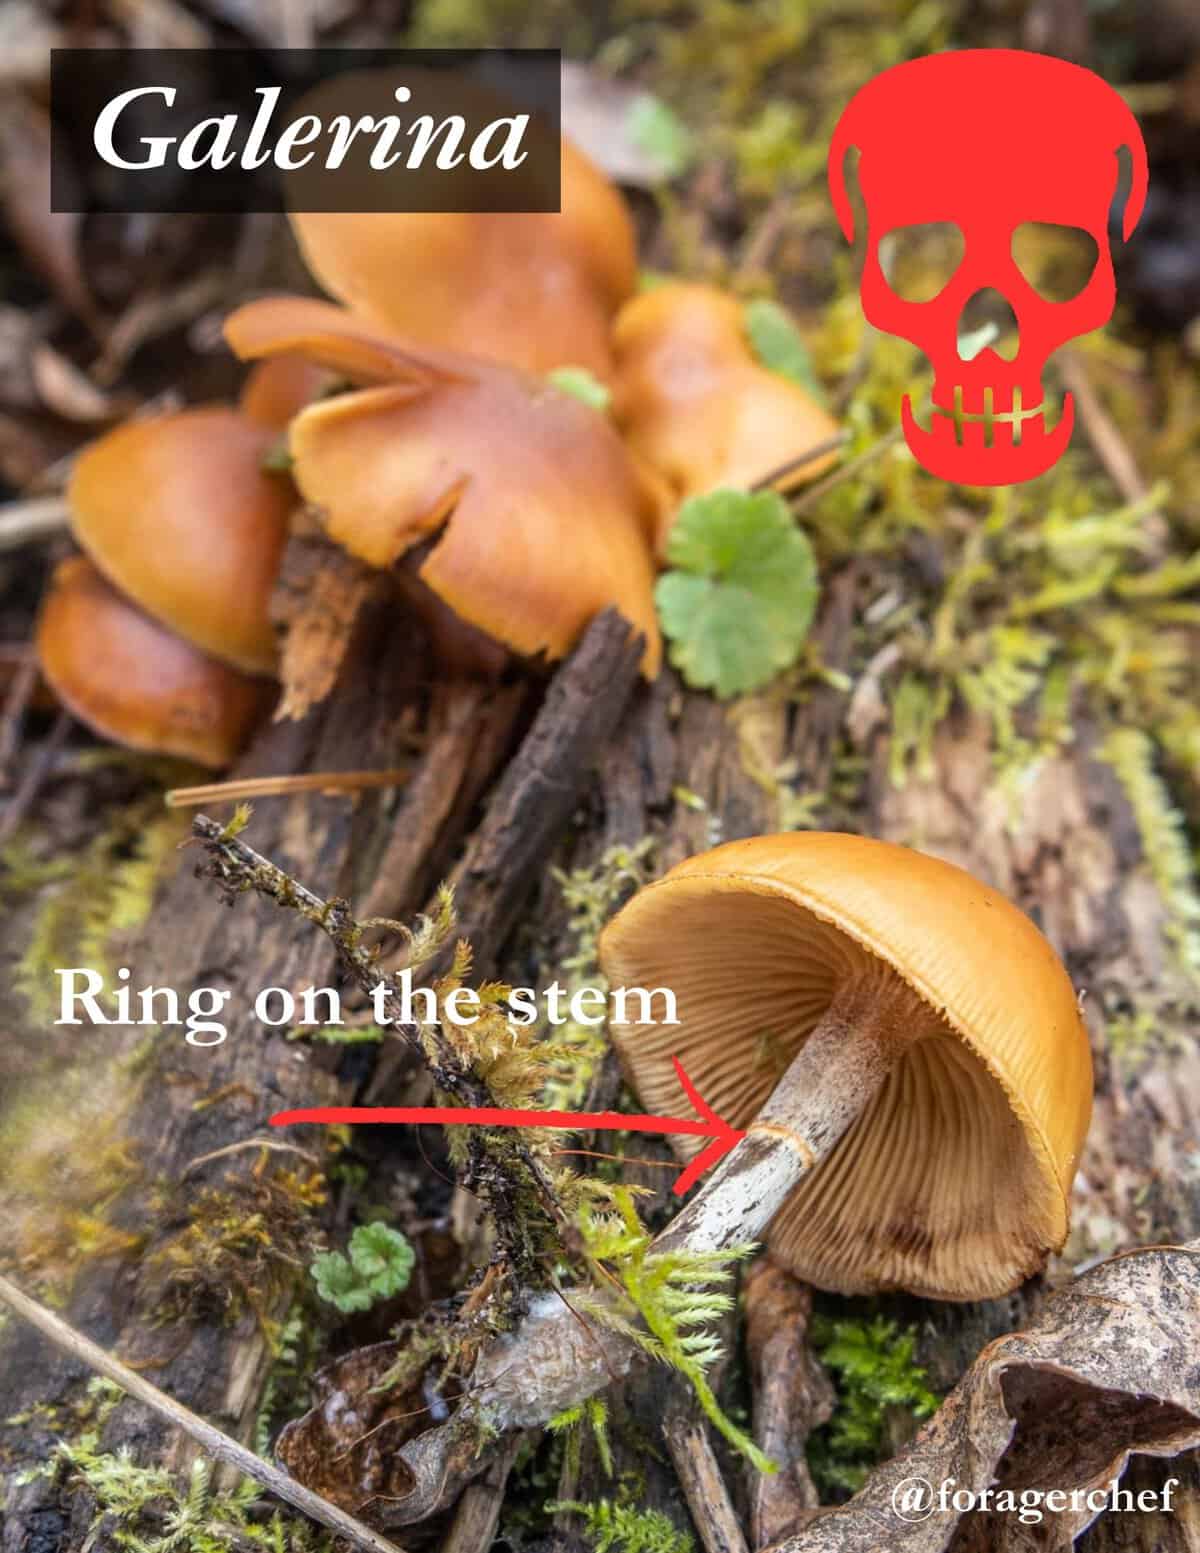 An infographic showing deadly galerina mushrooms, a mica cap mushroom look a like growing on a log for identification.